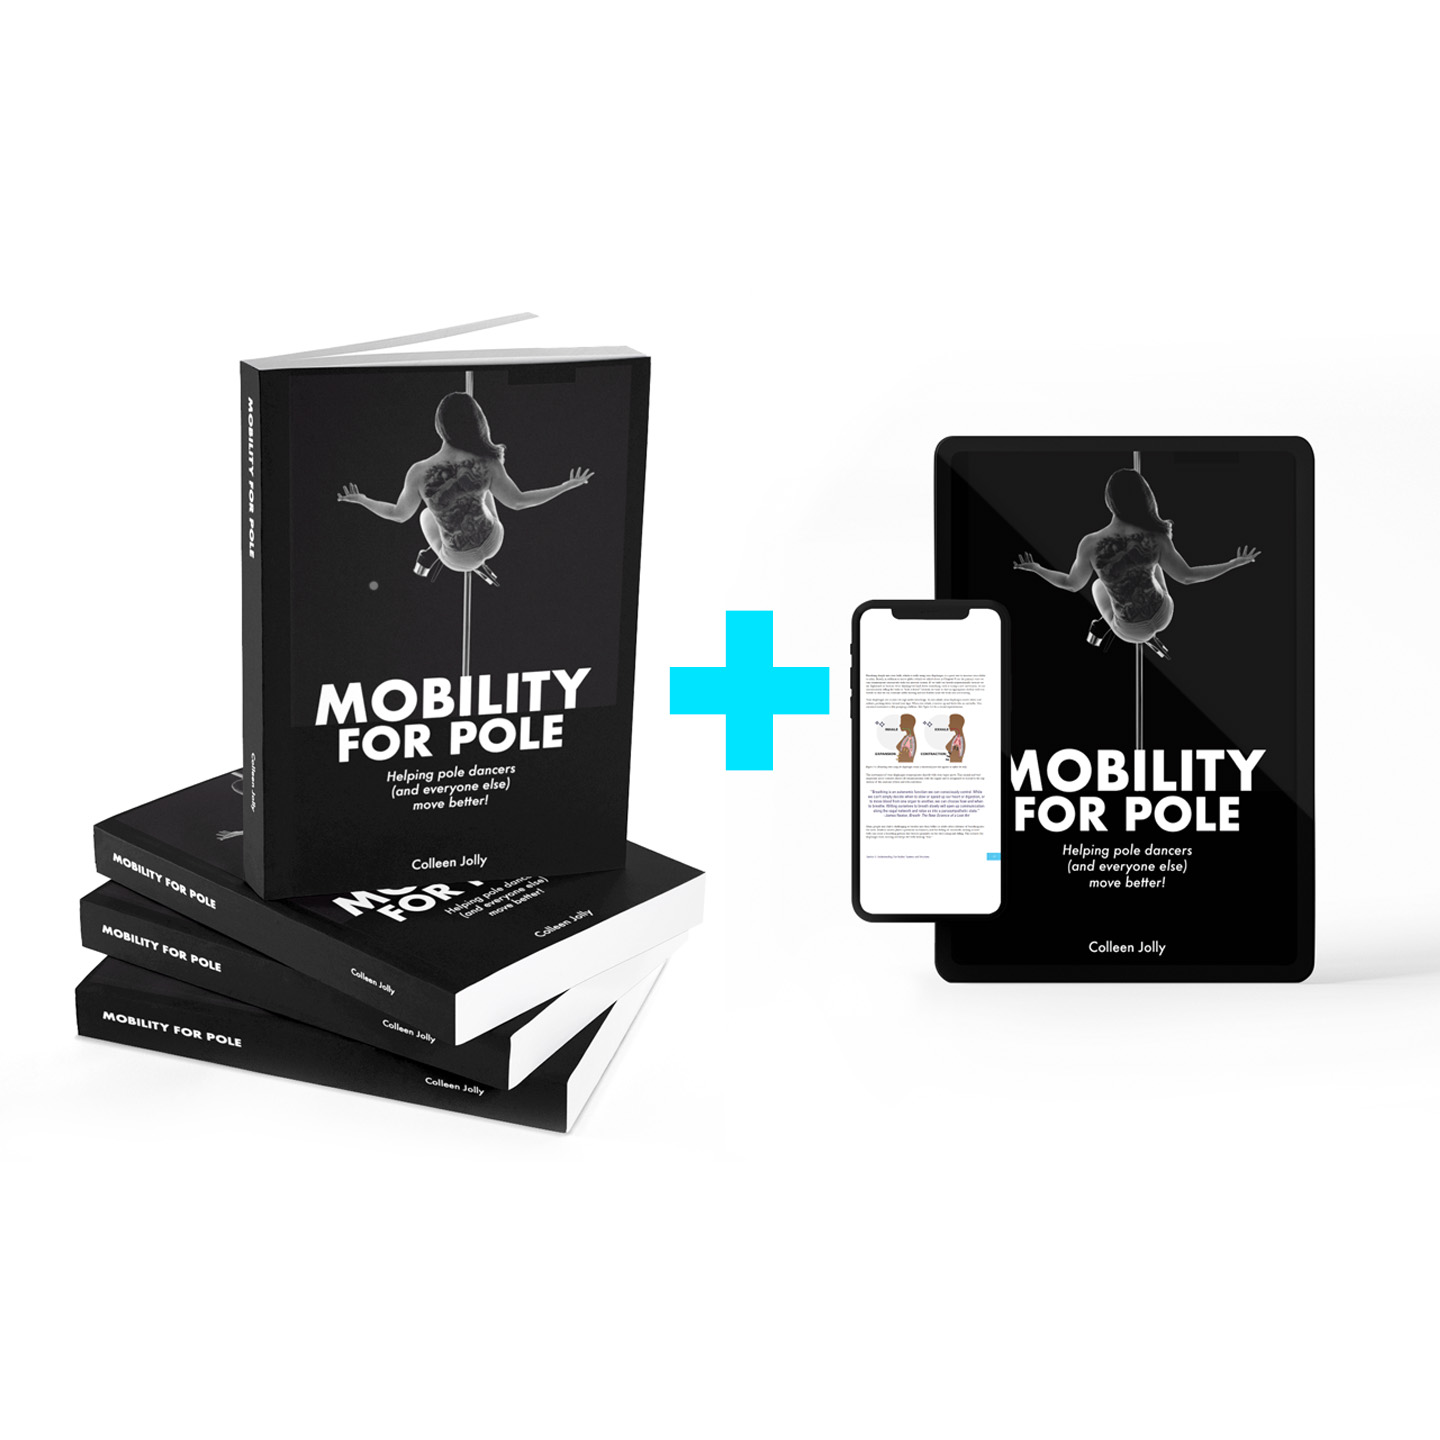 Image of Mobility for Pole book plus version for phone.